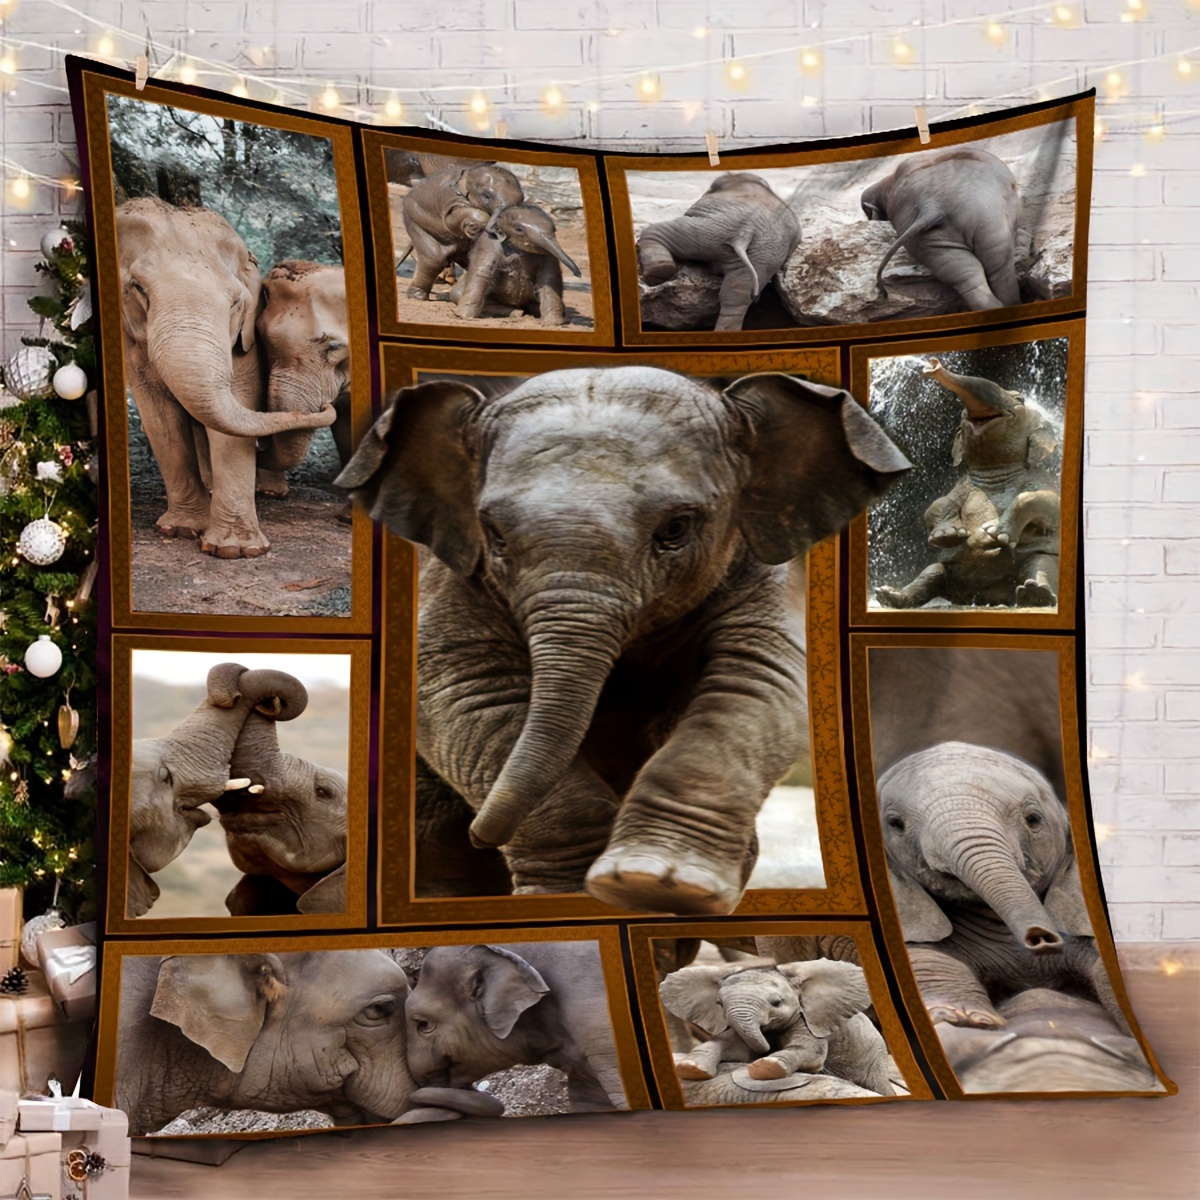 

1pc Gift Blanket For Friends Little Elephant Creative Stitching Pattern Soft Blanket Flannel Blanket For Couch Sofa Office Bed Camping Travel, Multi-purpose Gift Blanket For All Season